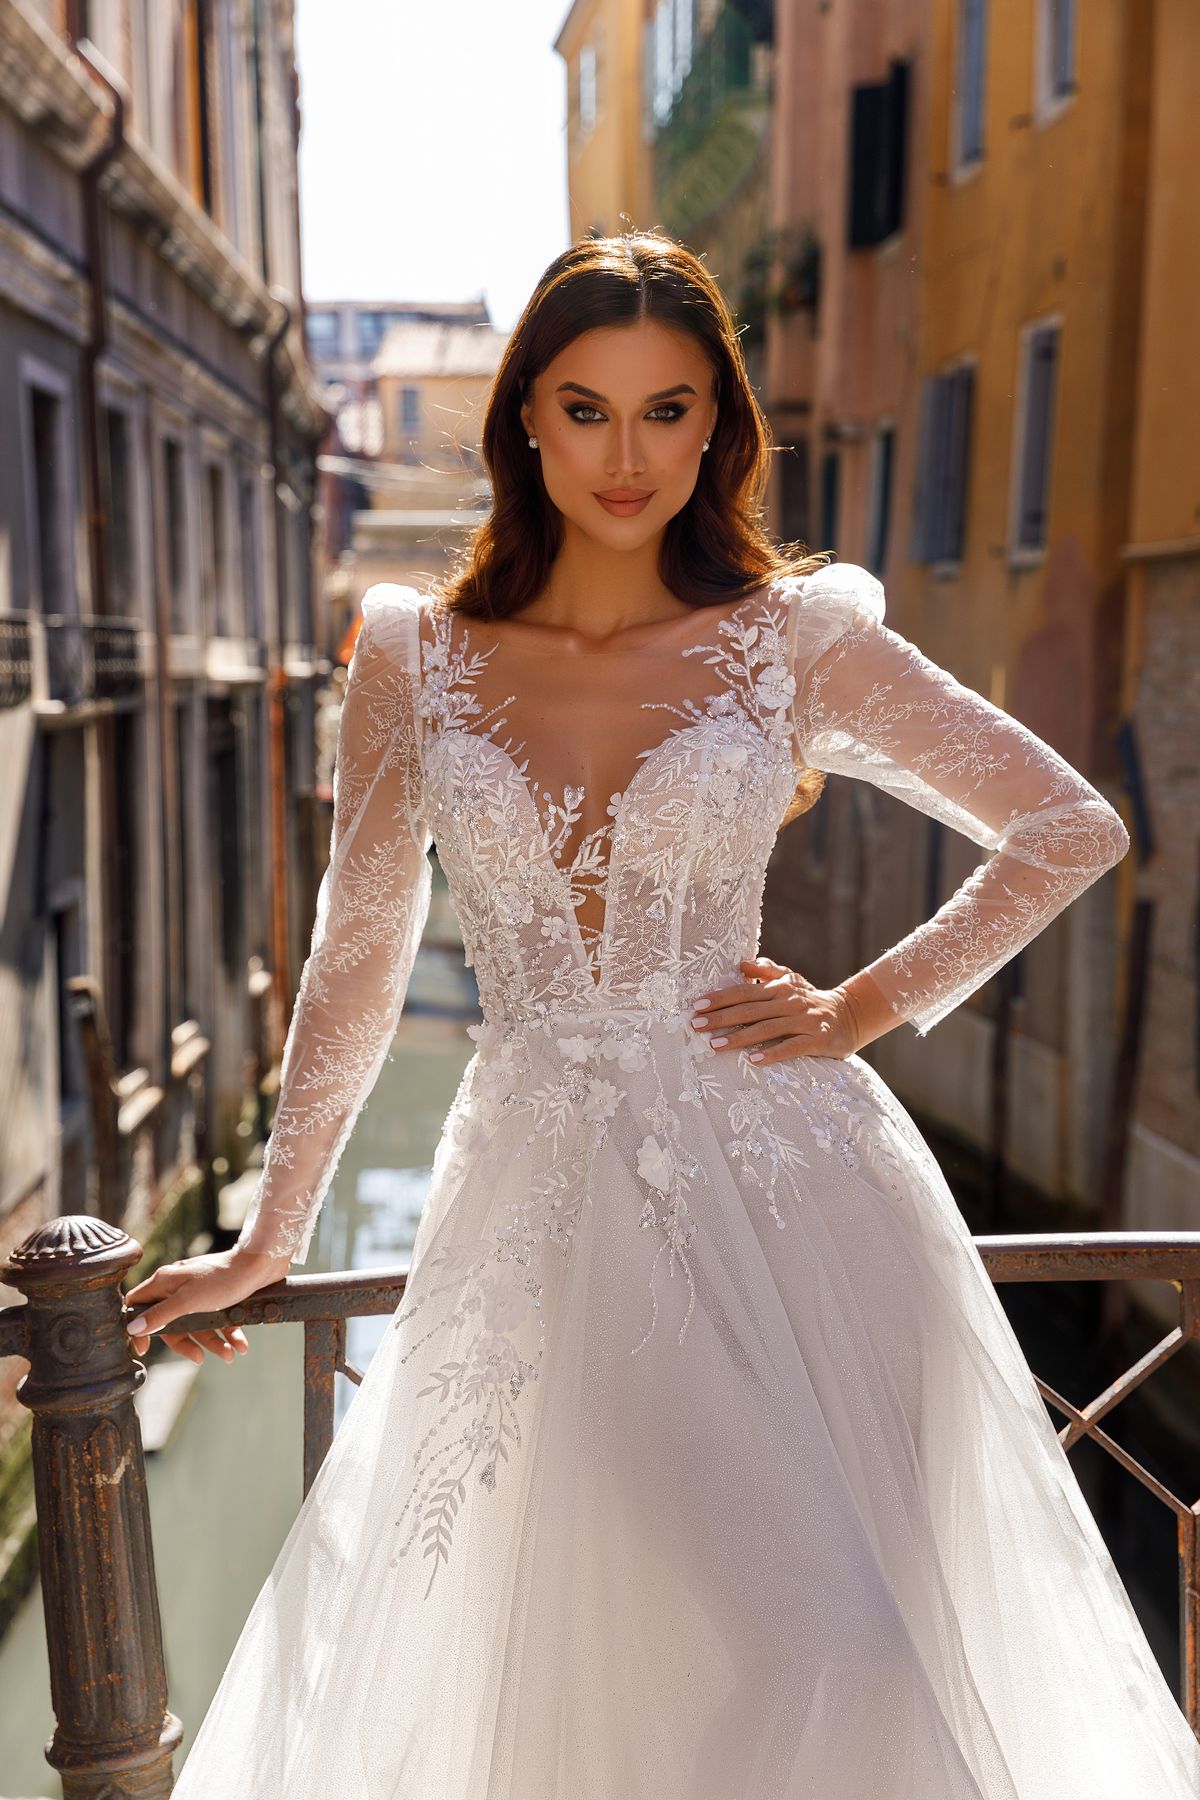 couture style wedding dress Sabrina with A-line silhouette, long lace sleeves, flower neckline and back with the buttons by oksana mukha, nz 10